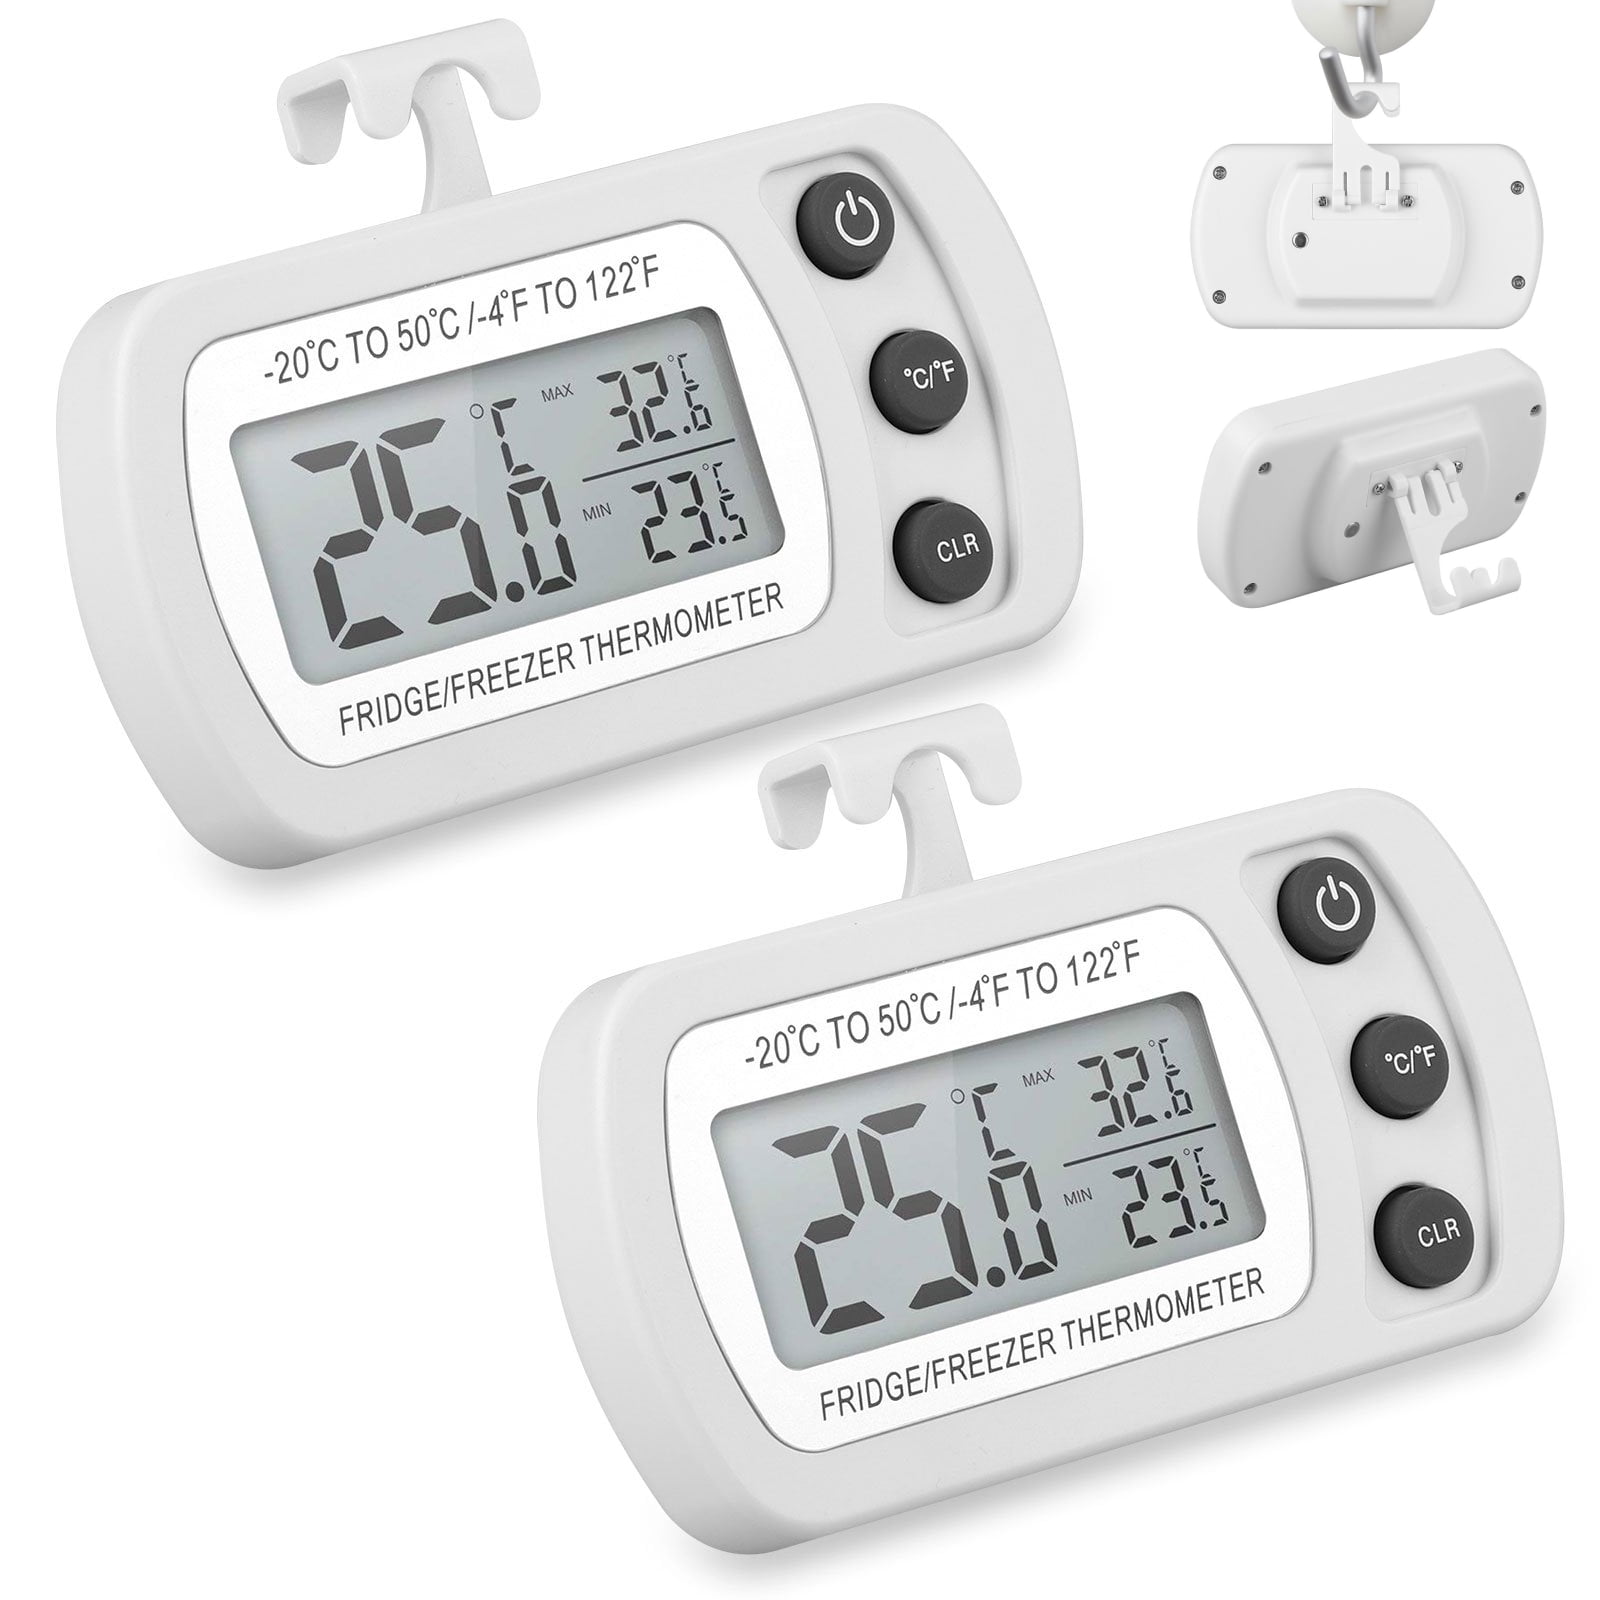 Digital Refrigerator Freezer Room Thermometer with Frost Alert and Magnetic Hook 